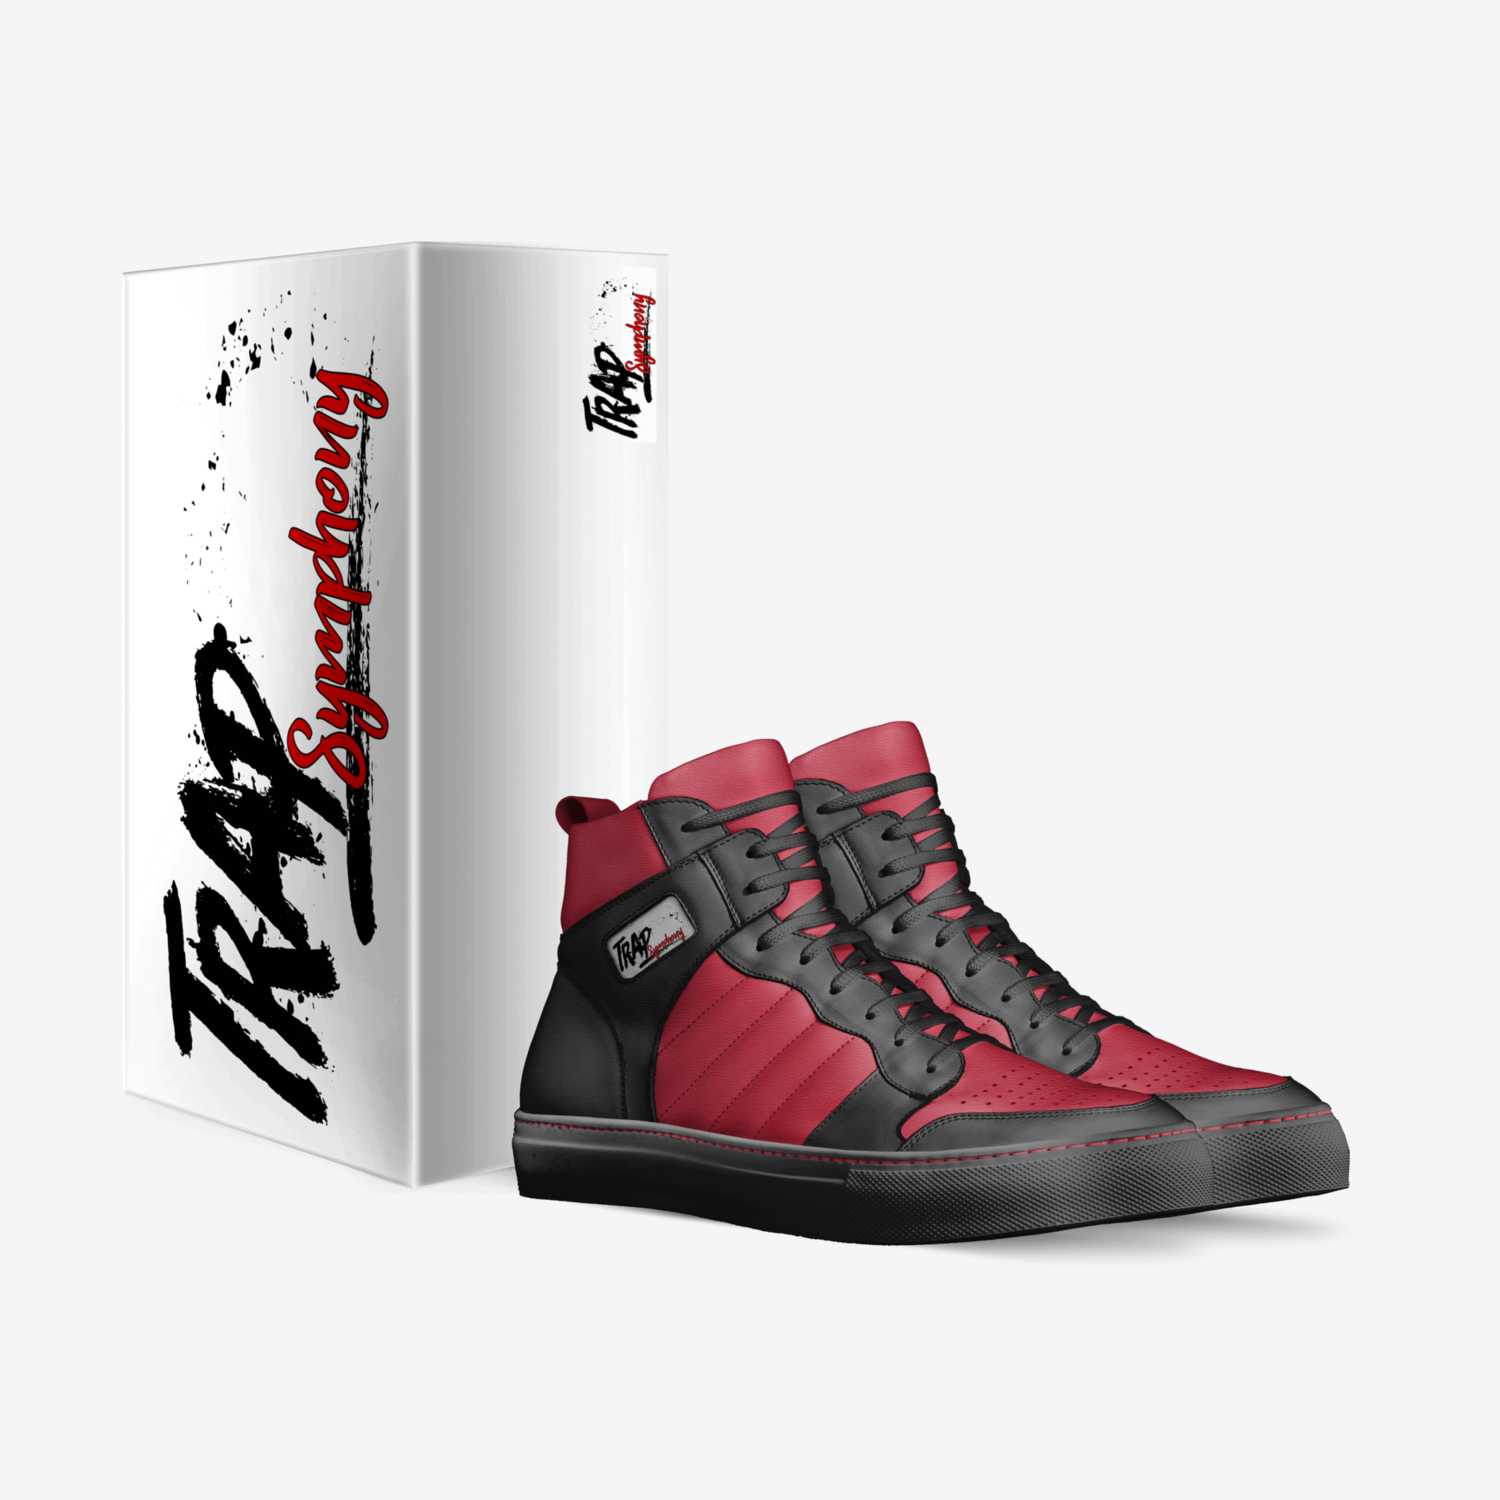 TRAP THRILLS custom made in Italy shoes by Erik Sosa | Box view